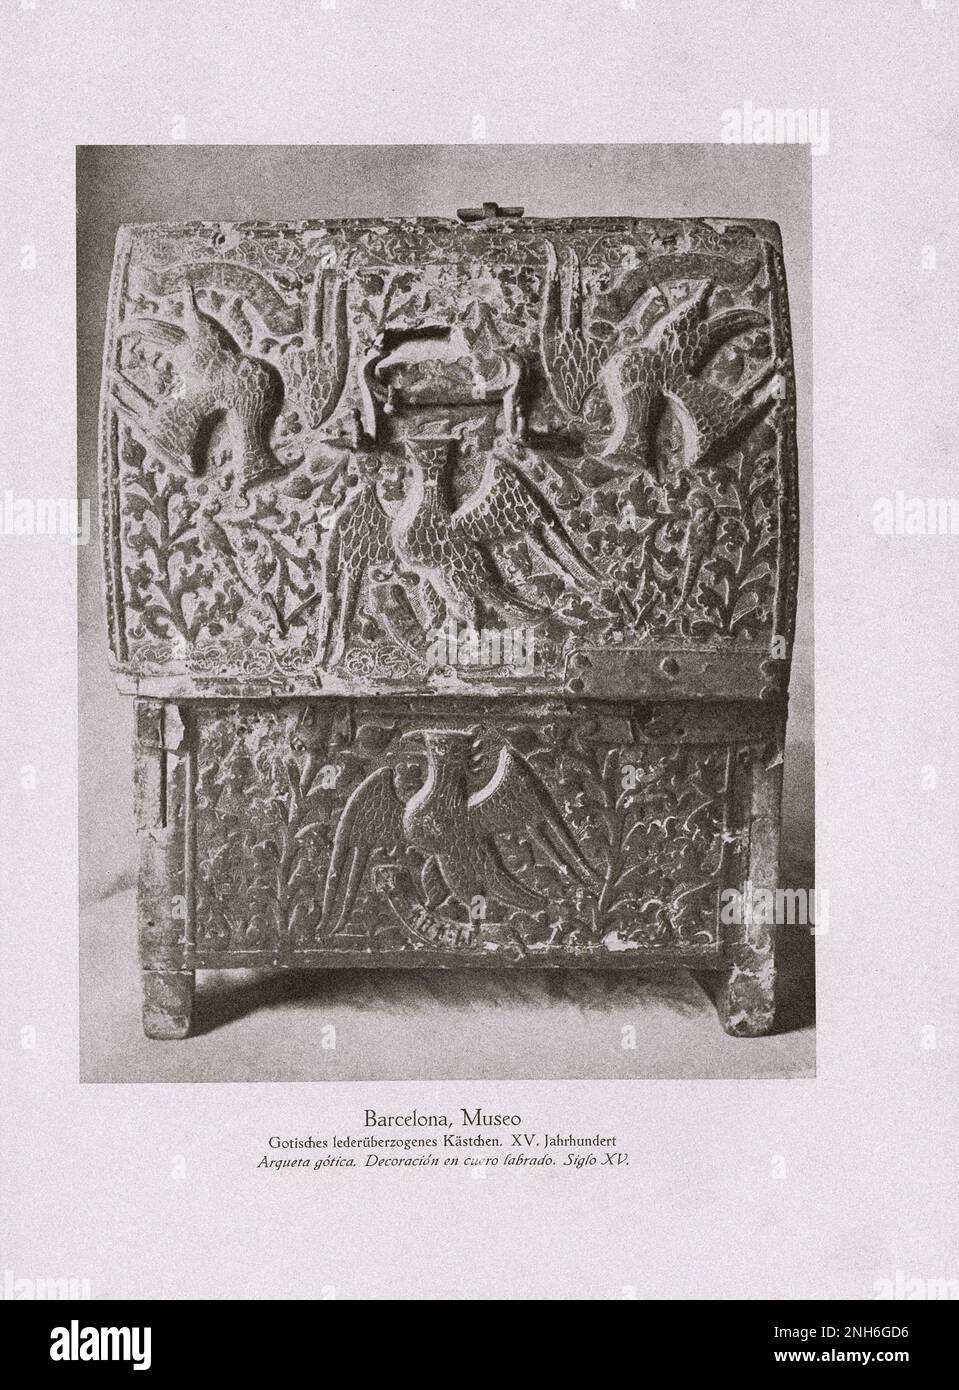 Art of Old Spain. Vintage photo of Gothic leather covered box. Museum in Barcelona Gothic leather-covered box. XVI century Stock Photo